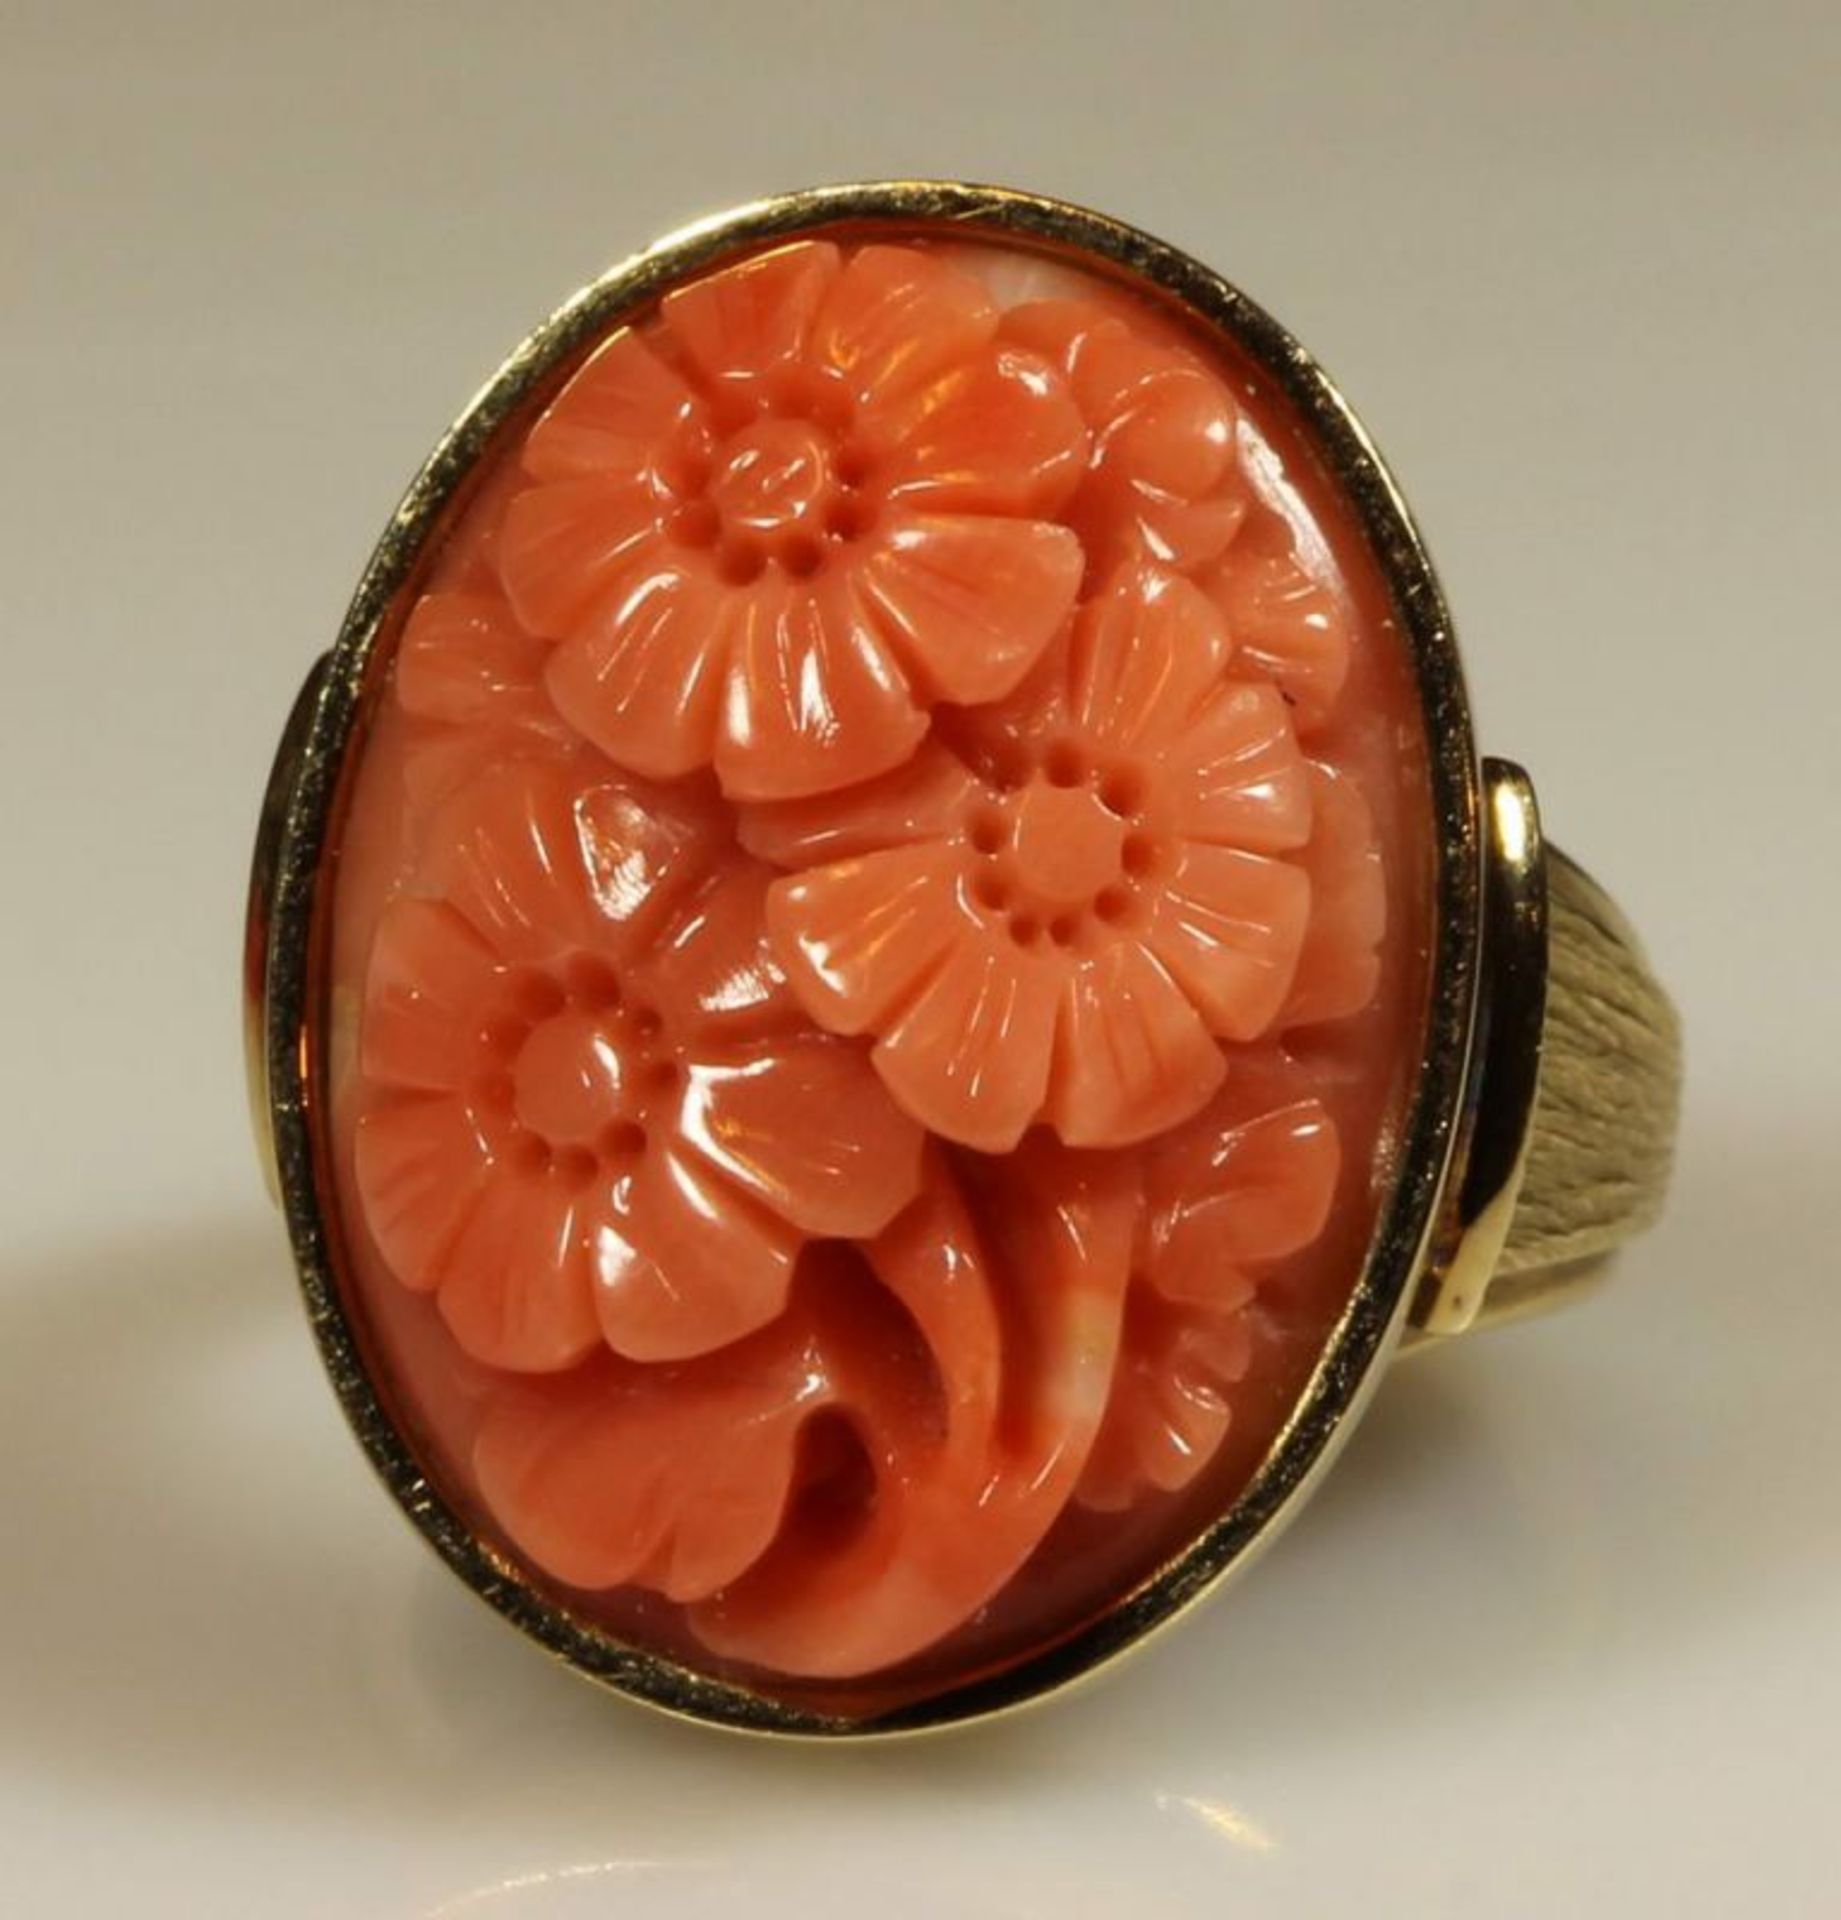 Ring, GG 585, geschnitzter Korall-Cabochon, "Blüte", 11 g, RM 17.5 20.00 % buyer's premium on the